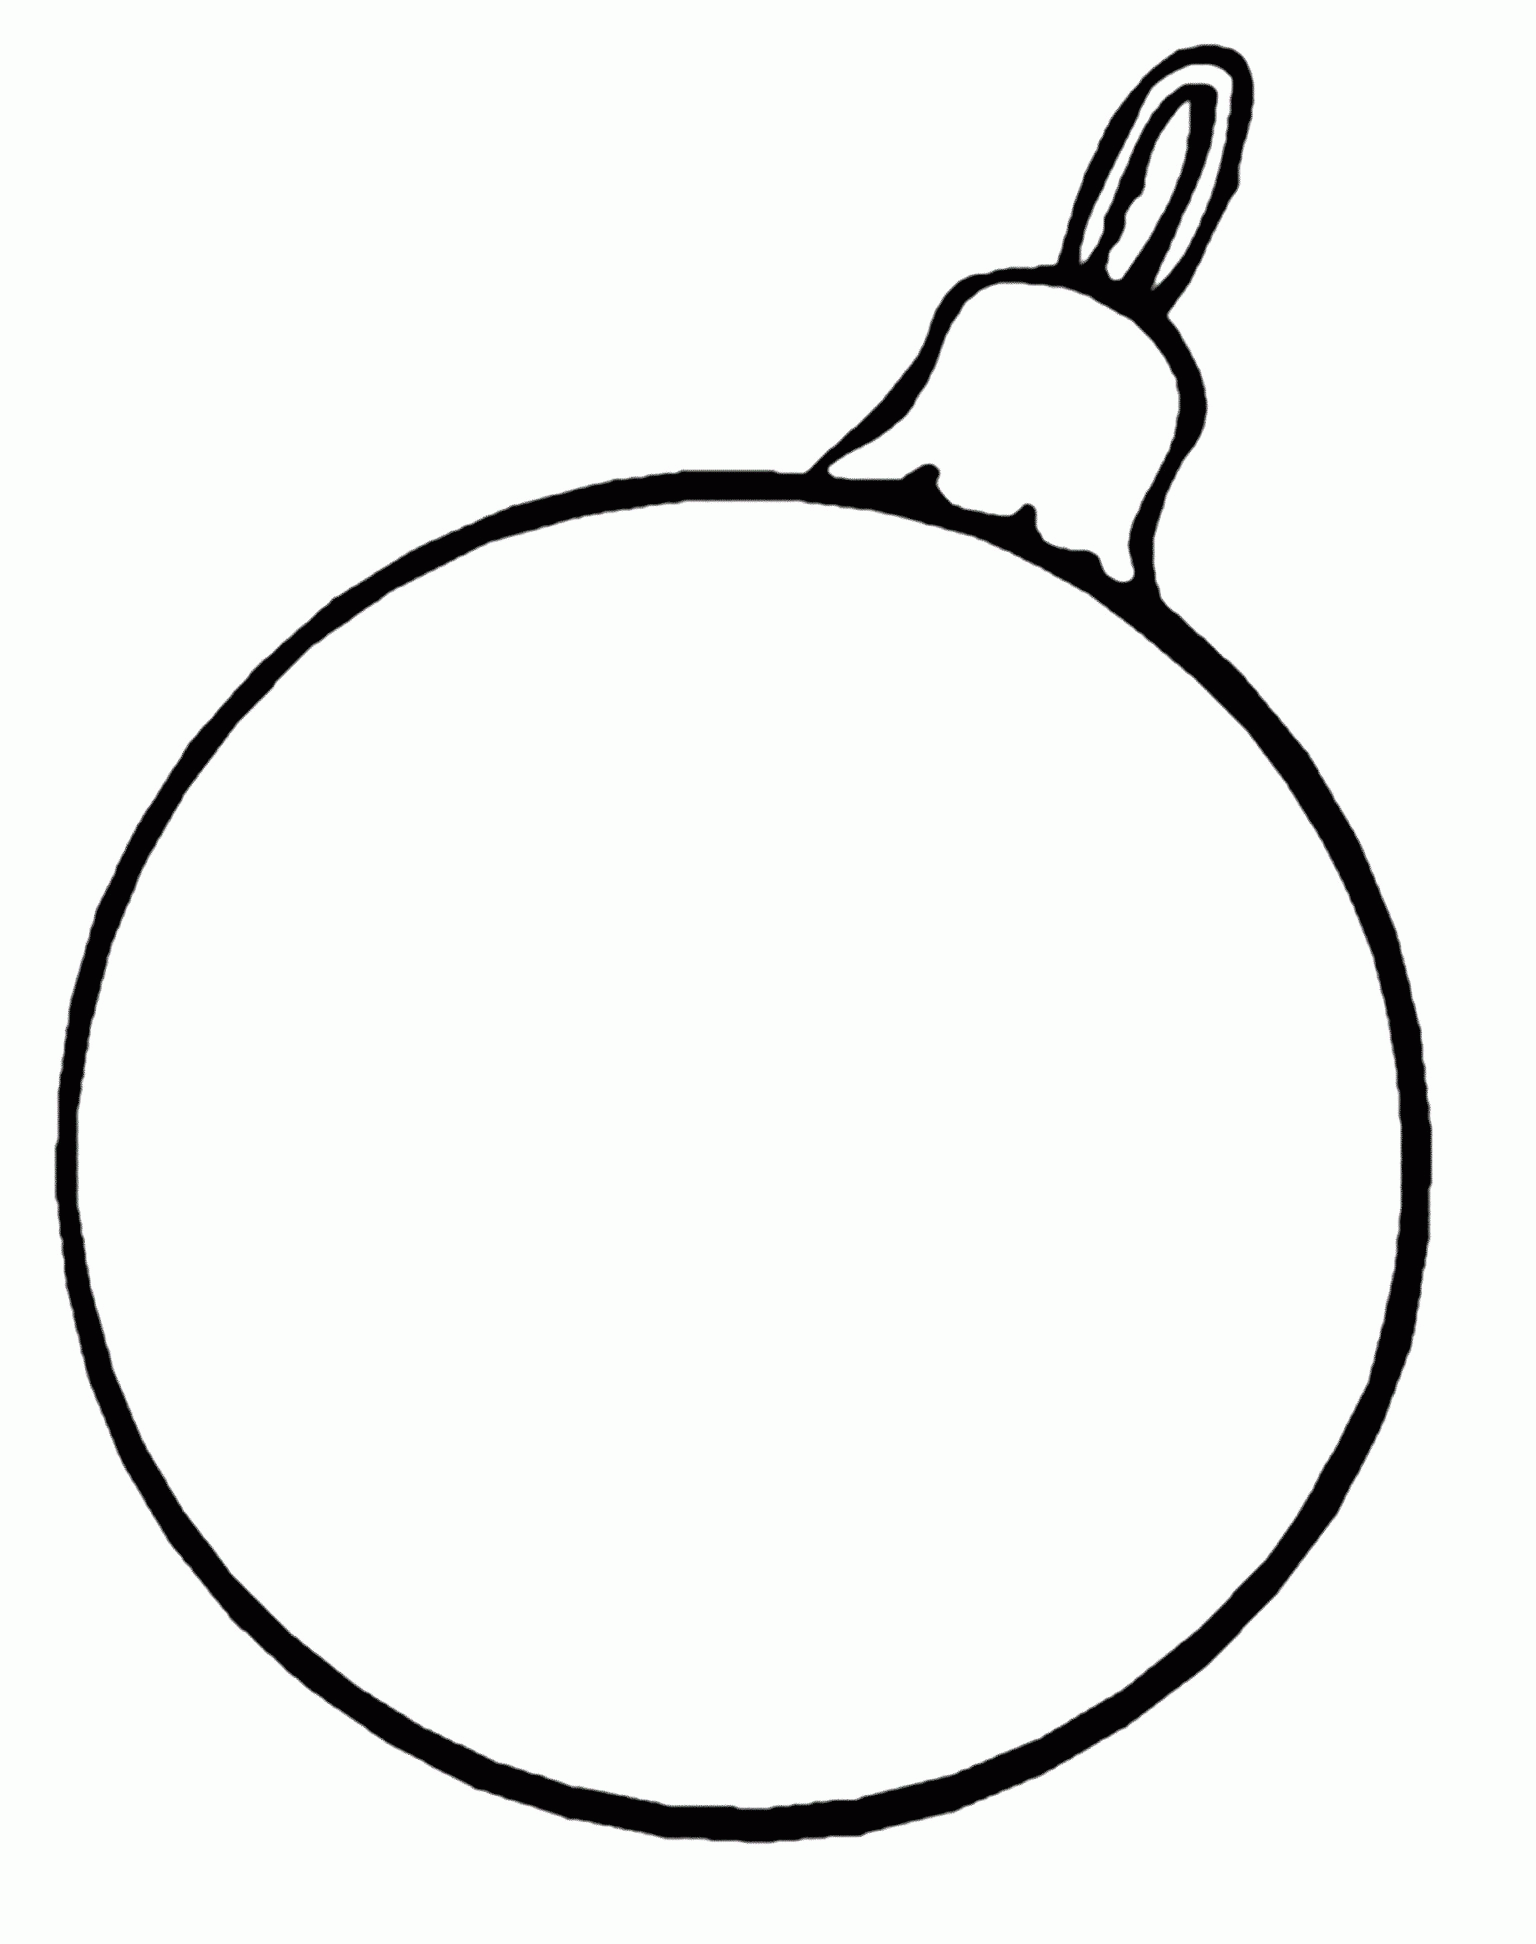 Printable Coloring Pages Christmas Ornament | Christmas Coloring ...